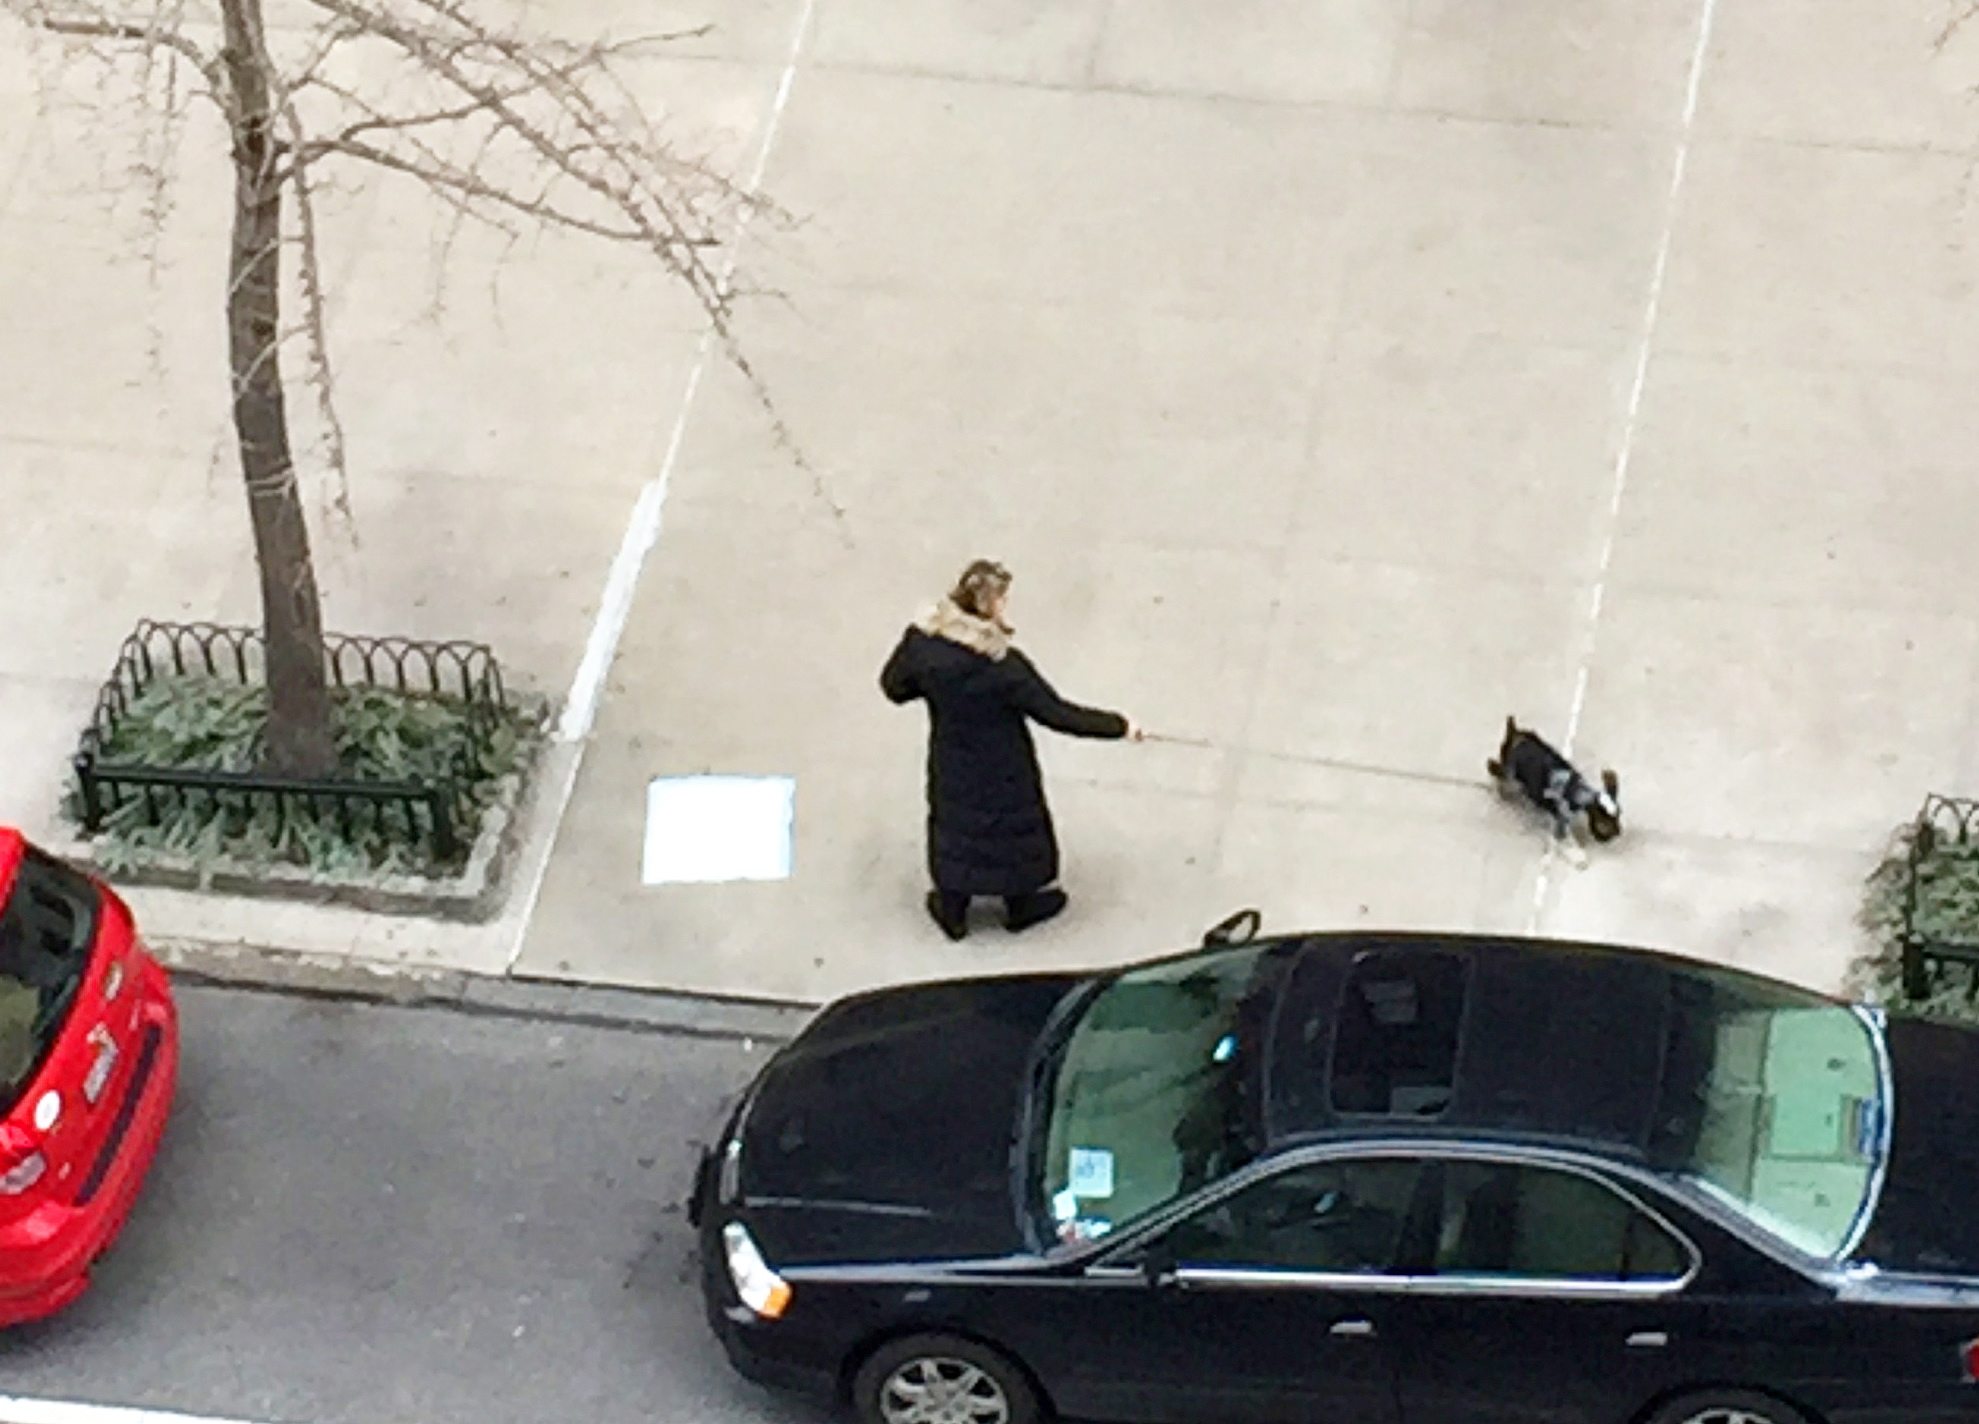 A person walking a dog has laid out a wee-wee pad on a New York sidewalk. Animal behavior experts caution that training dogs to use pads indoors might make it difficult for the dogs to go reliably on outdoor surfaces.